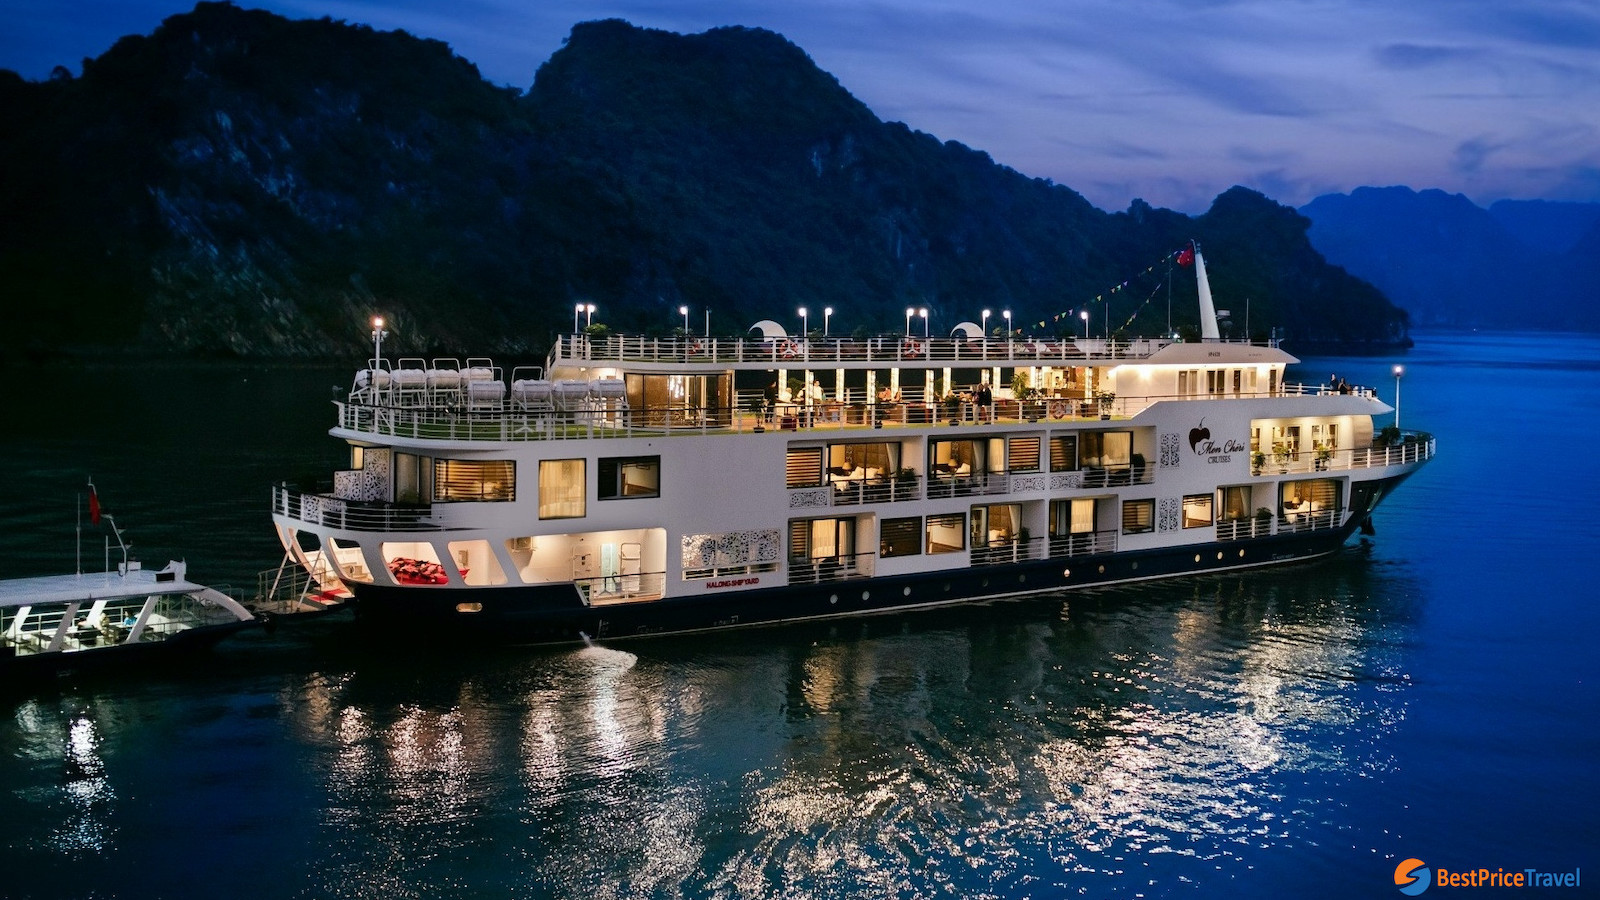 Overnight cruise - the best way to see Halong Bay 